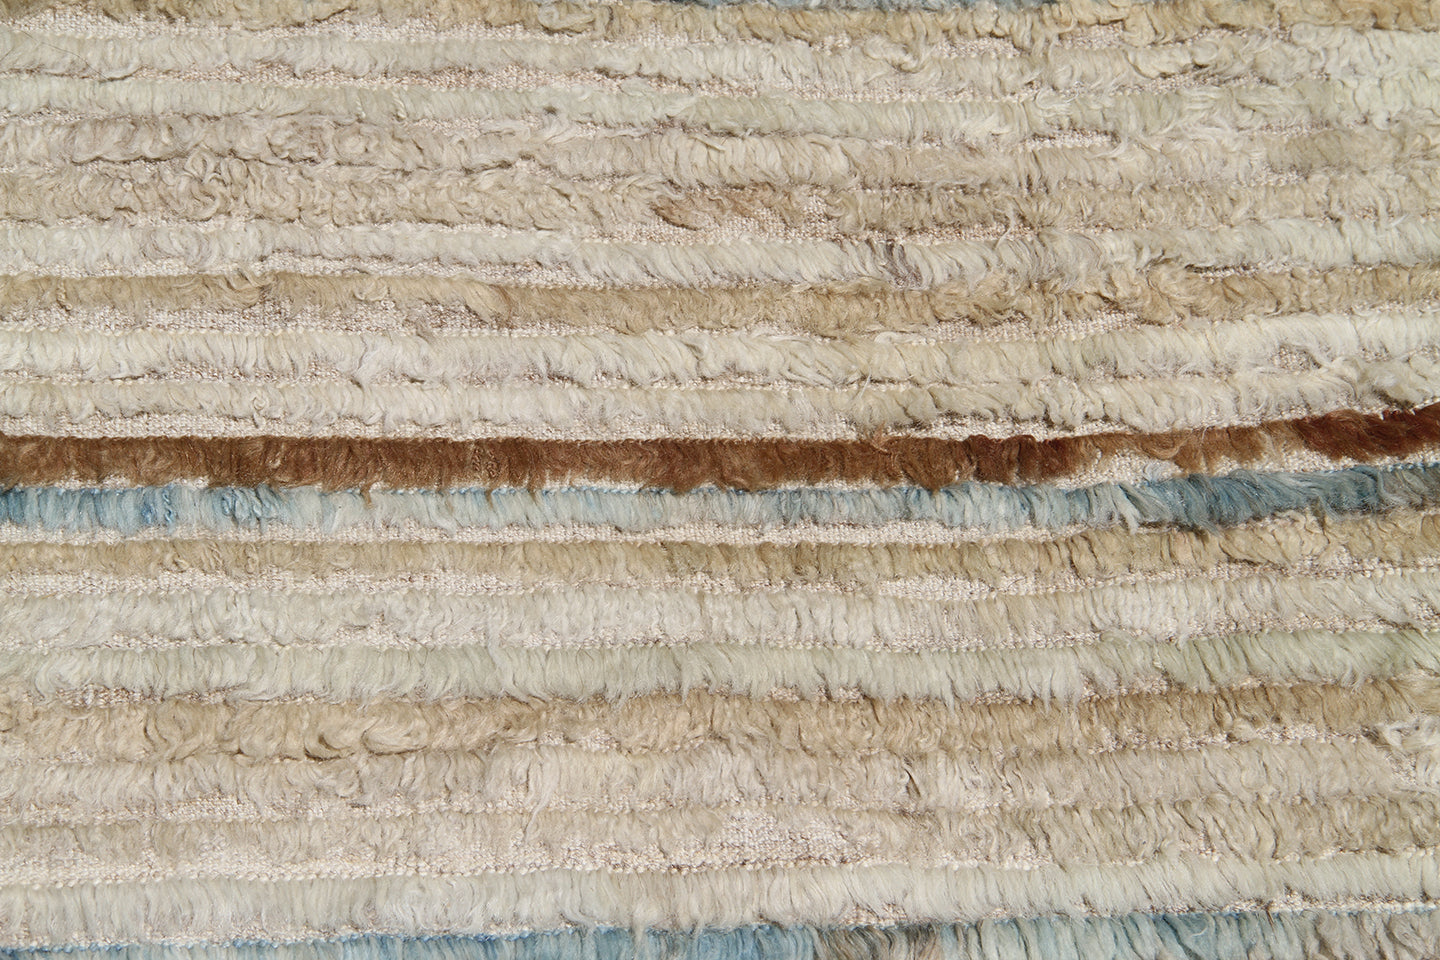 7'x9' Ariana Contemporary Moroccan Beige Brown and Blue Striped Barchi Wool Area Rug